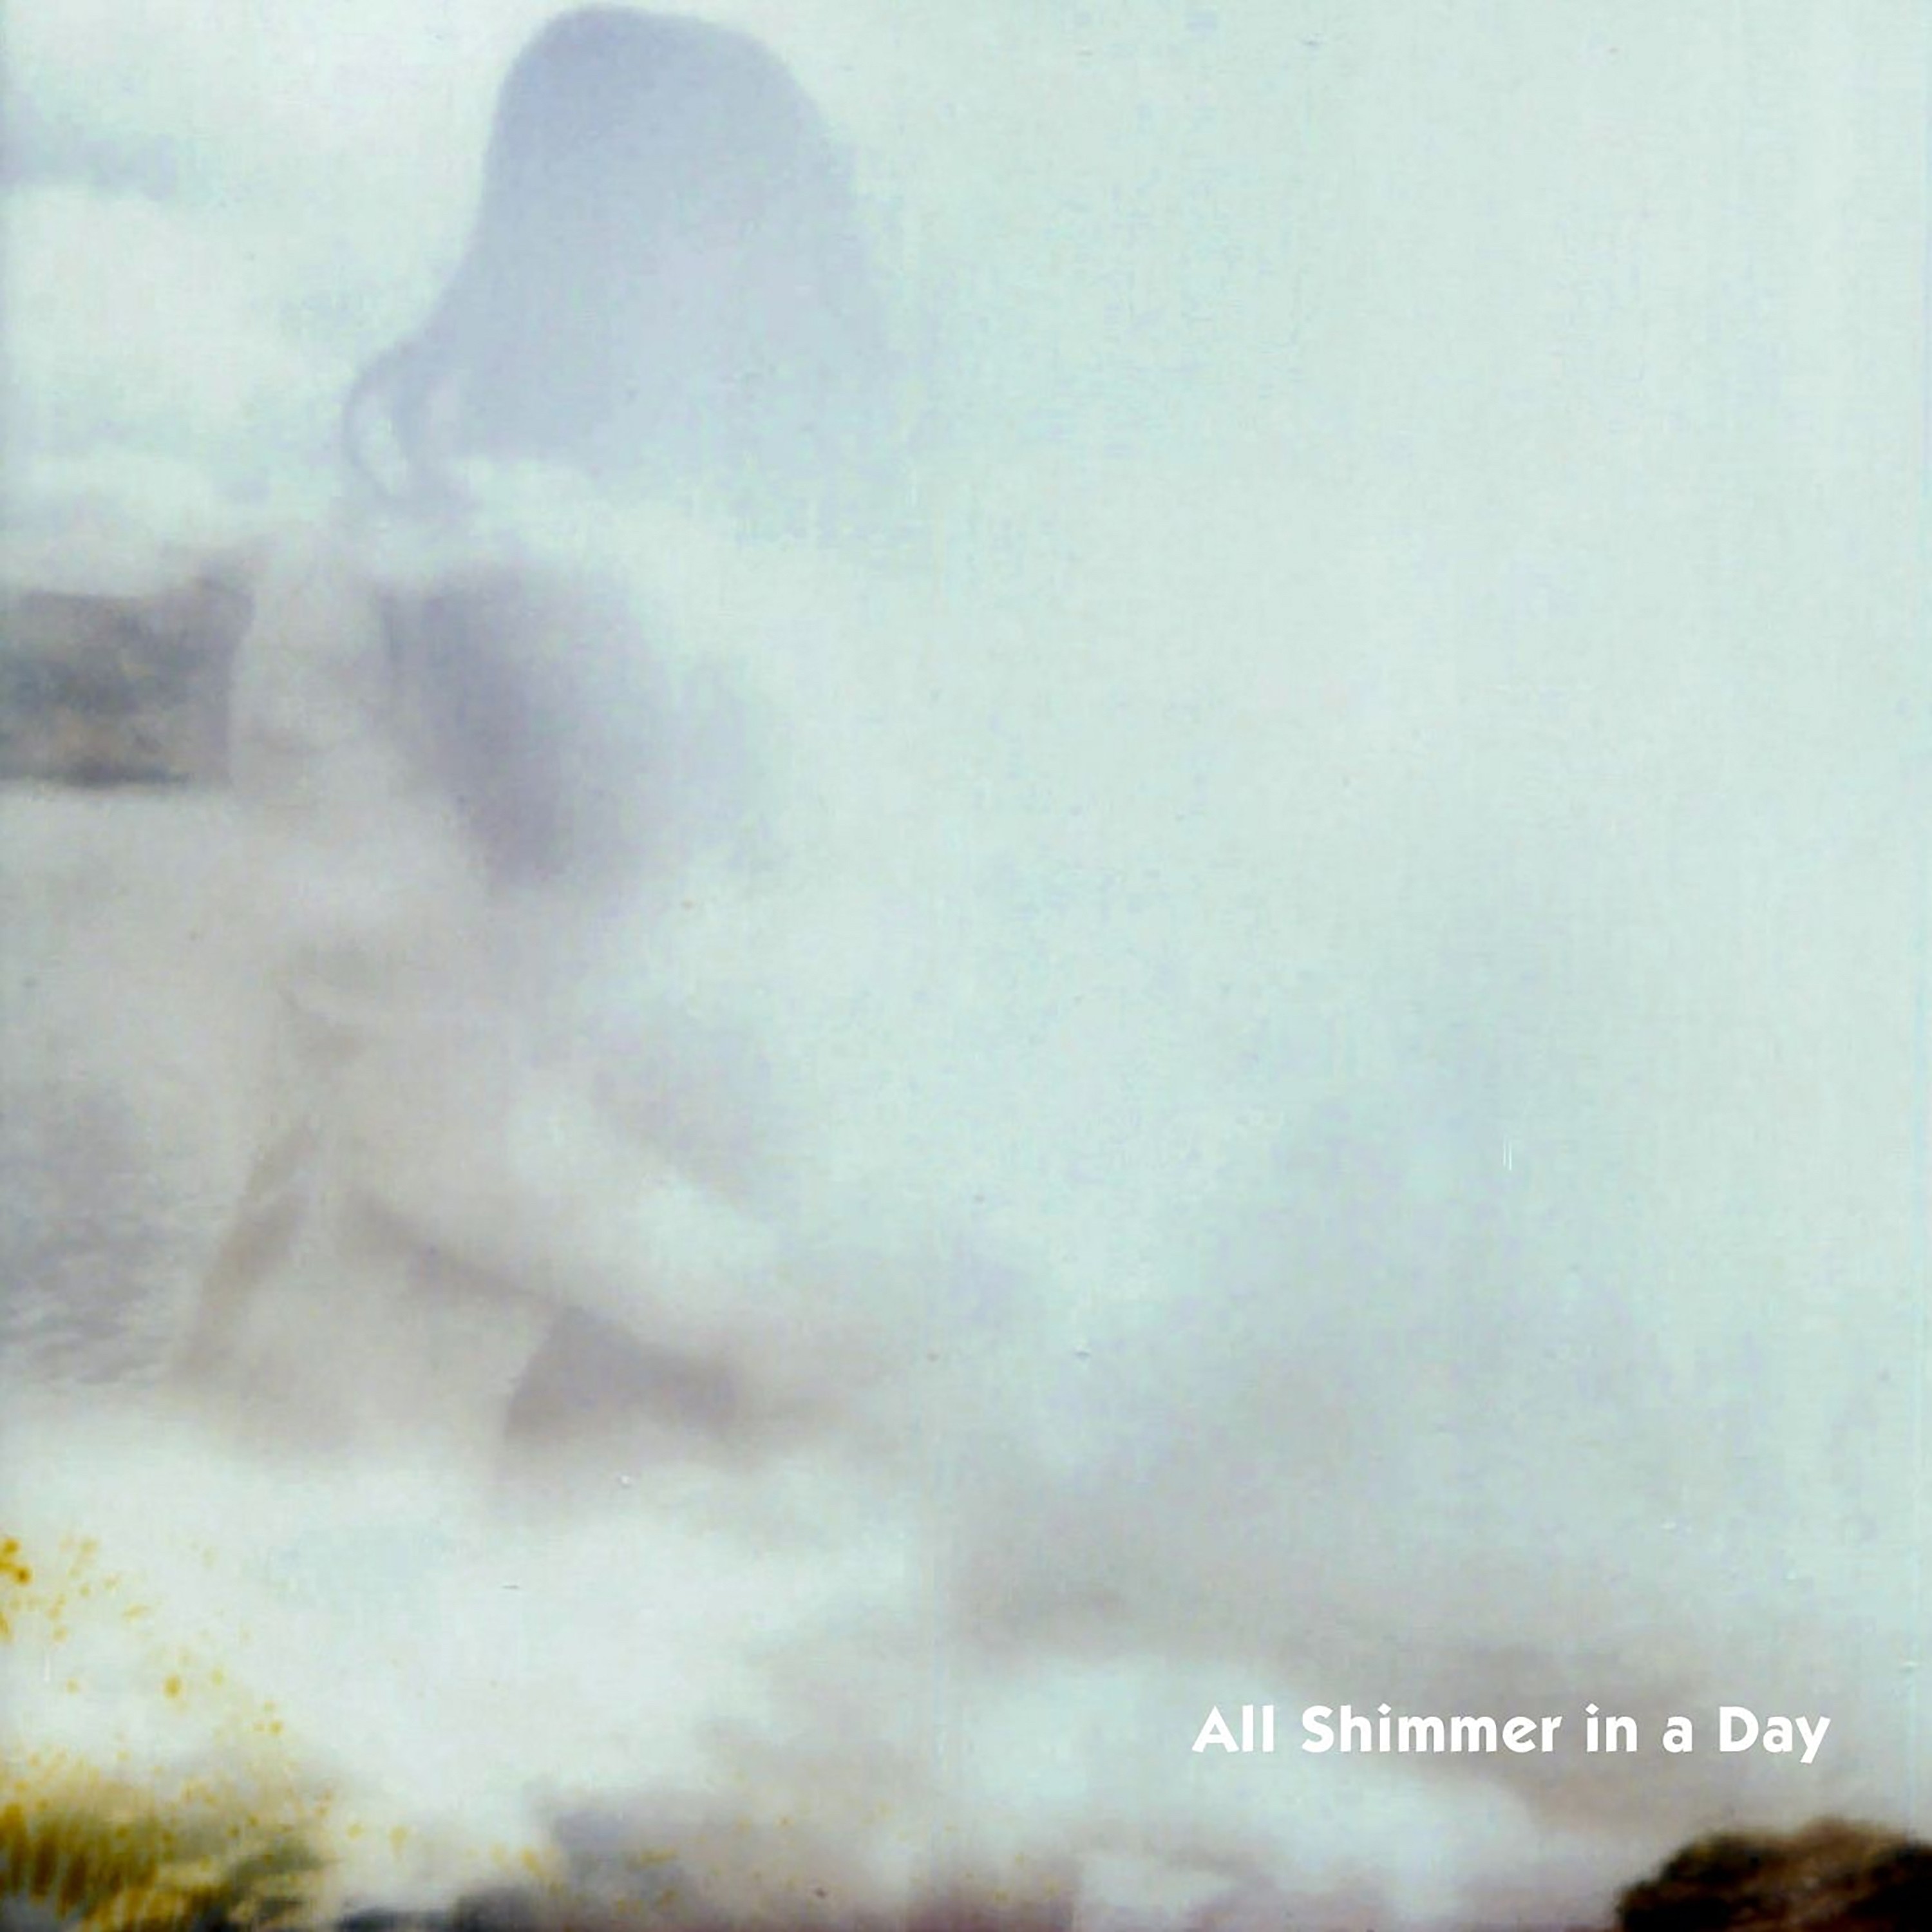 My Lucky Day – All Shimmer in a Day (2021) [FLAC 24bit/48kHz]